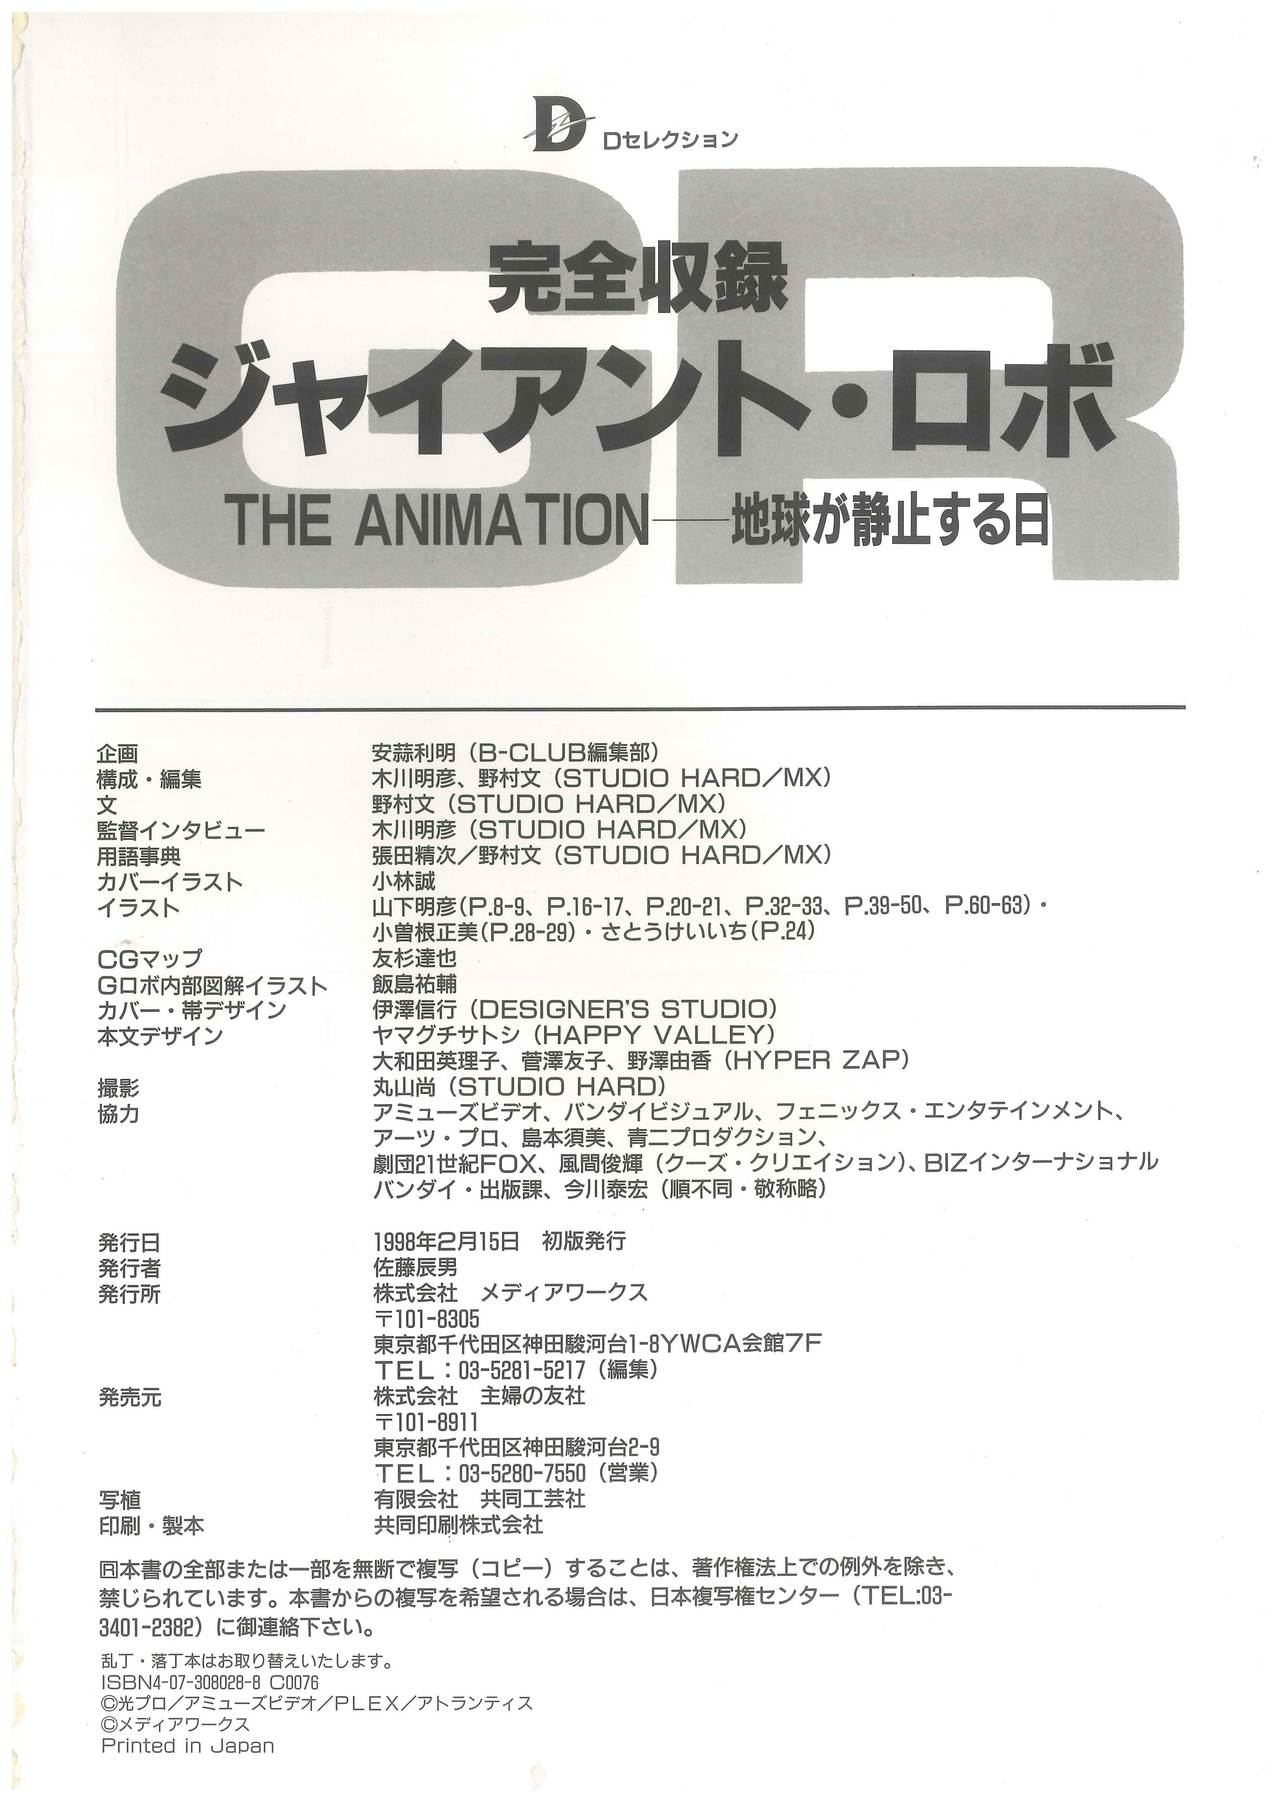 Complete Recording of Giant Robo THE ANIMATION - The Day the Earth Stood Still 131